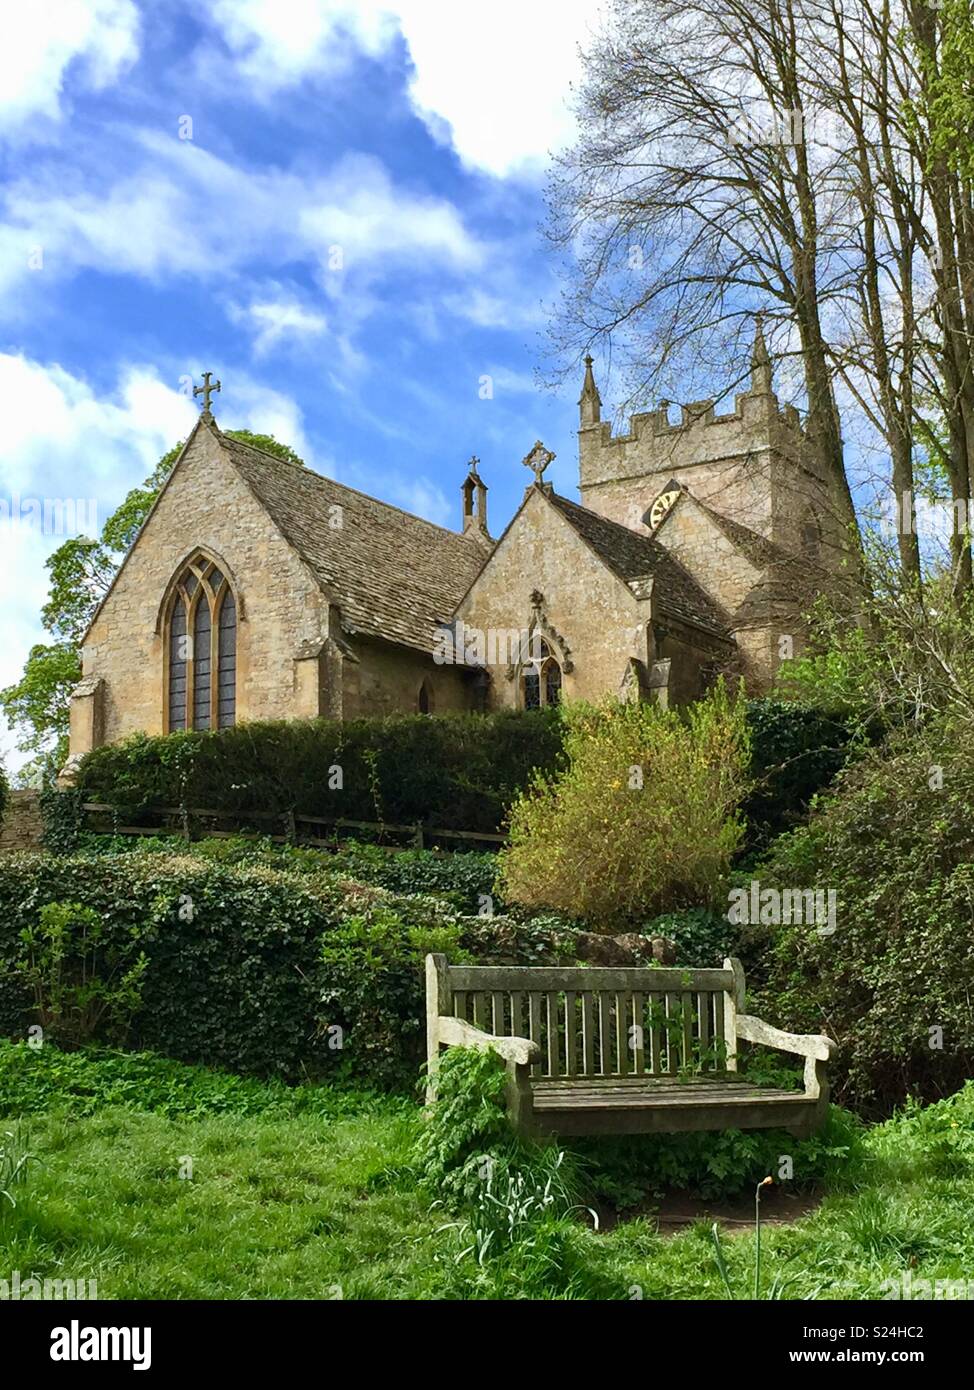 Church of St Peters in the village of Upper Slaughter, Gloucestershire, United Kingdom, looking uphill with wooden bench in foreground against a blue sky Stock Photo